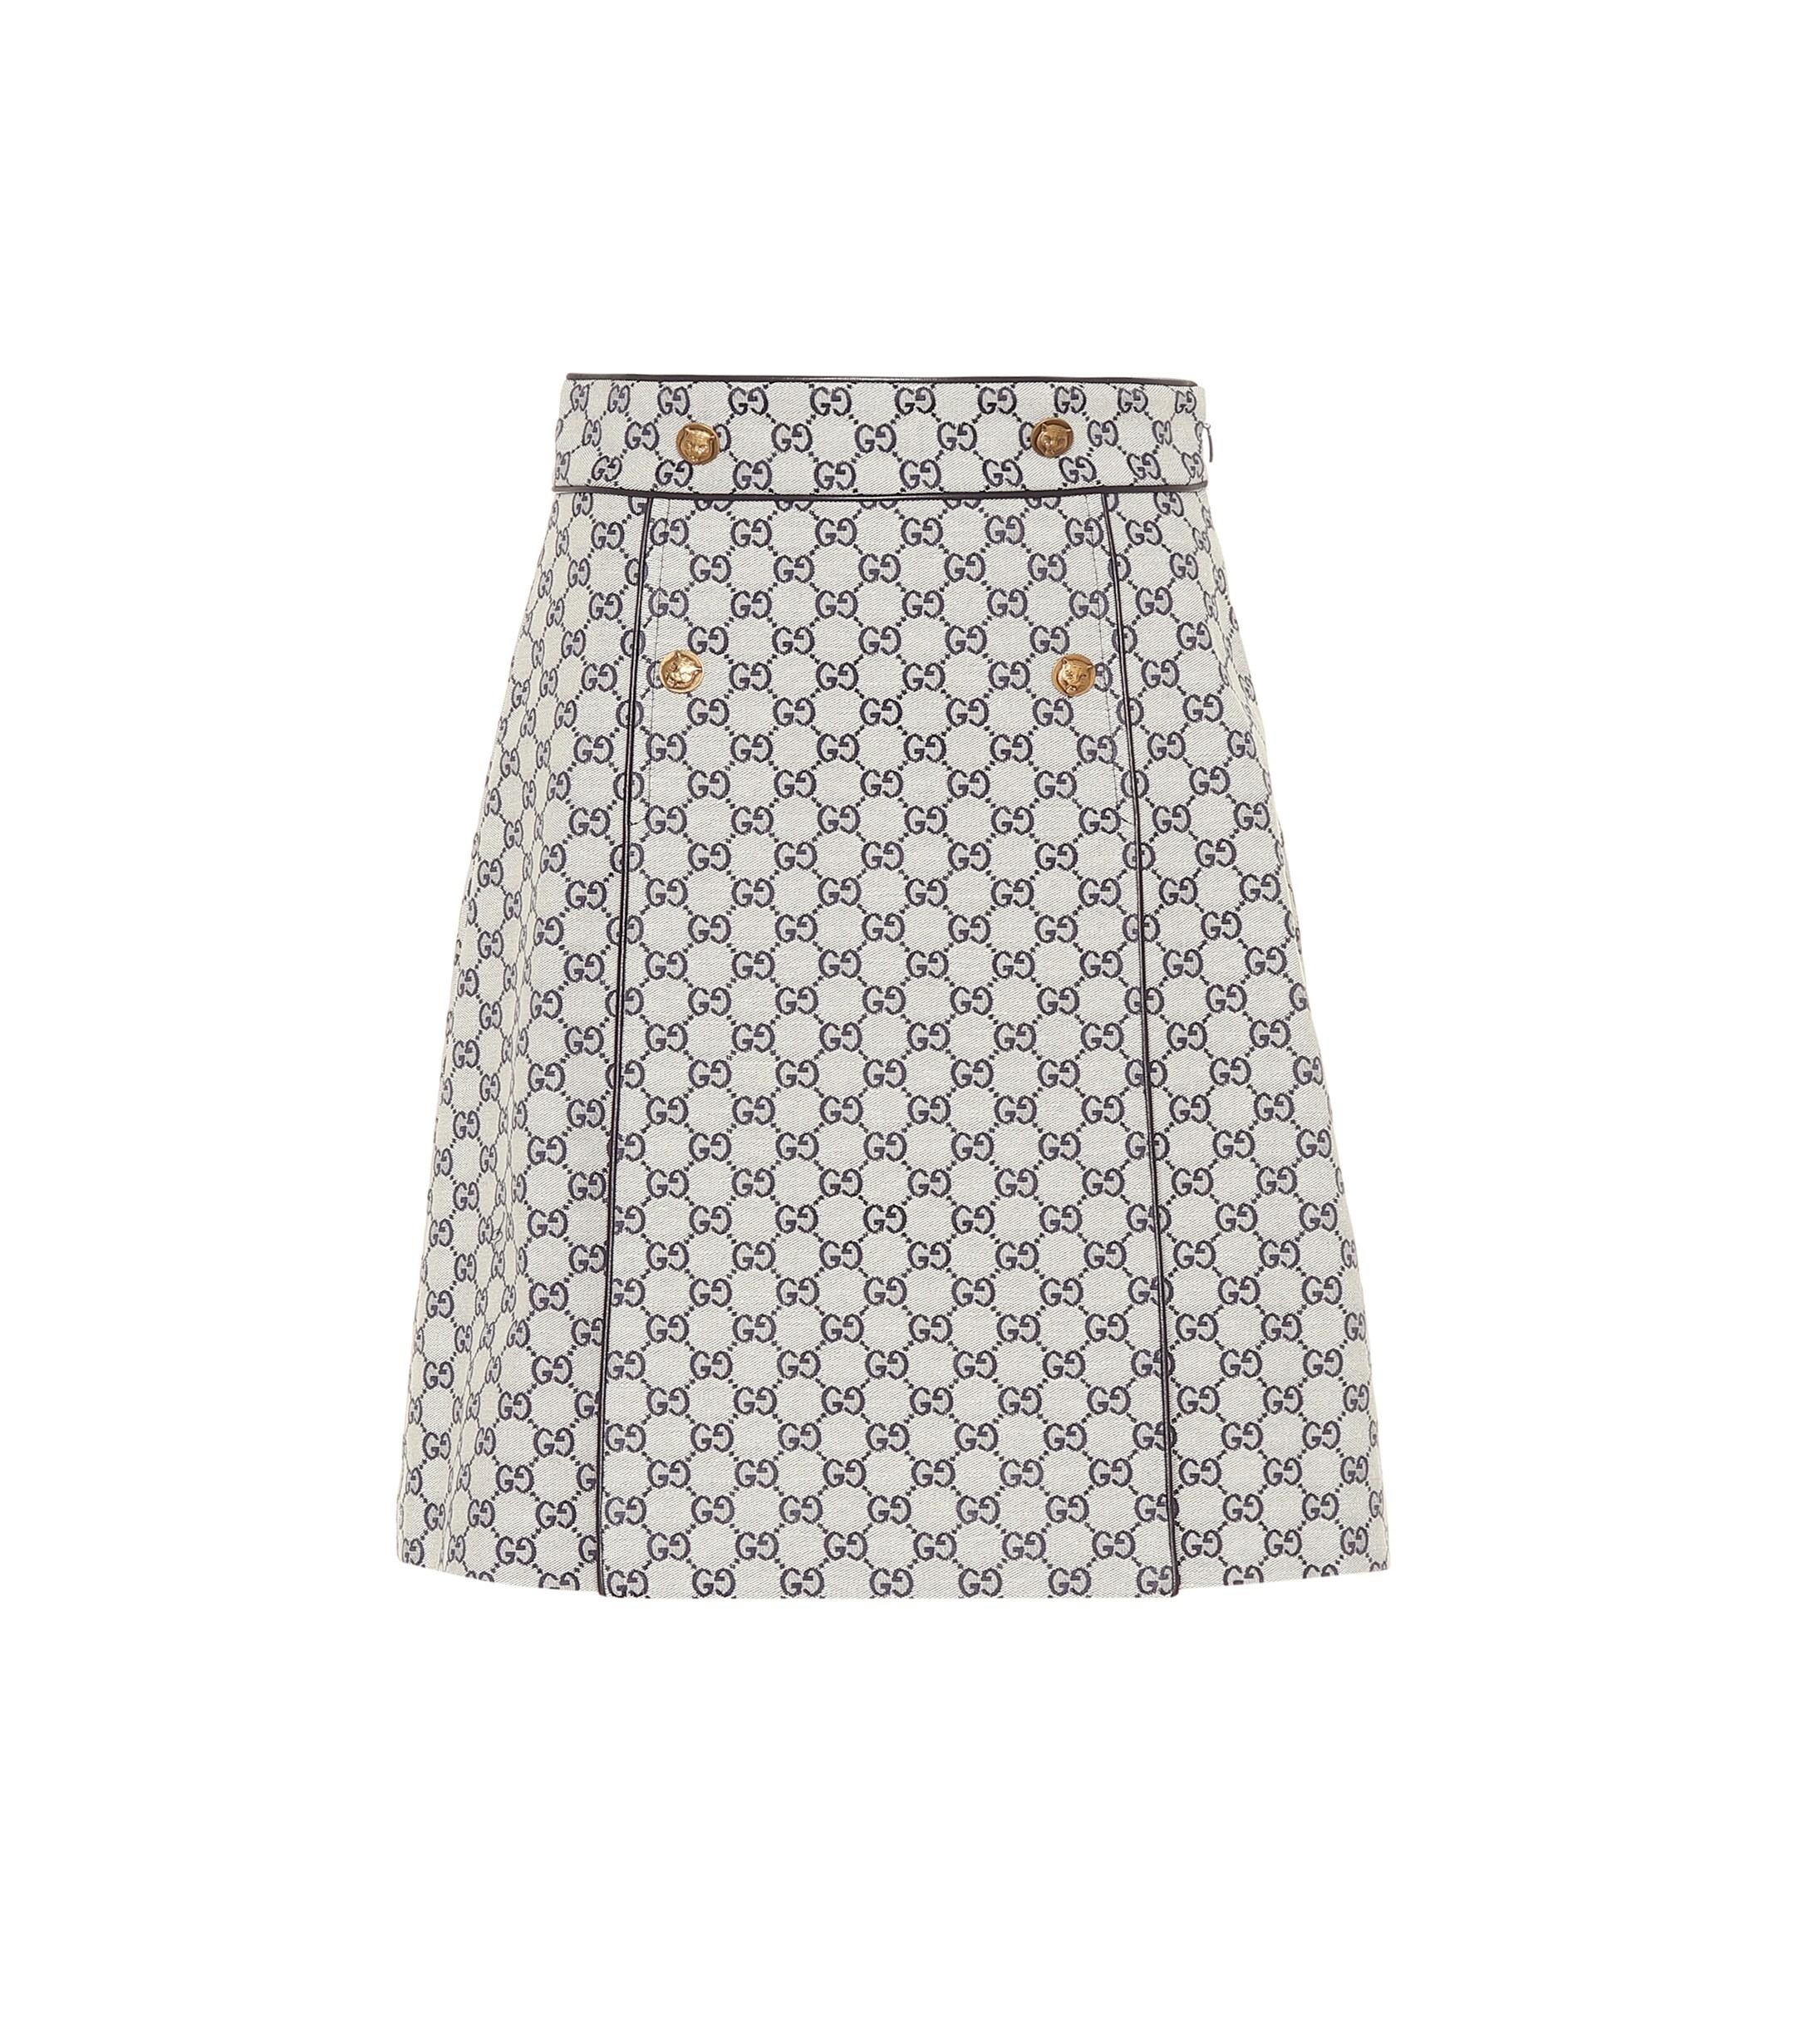 Gucci Gg Cotton-blend Skirt in Grey (Gray) - Lyst